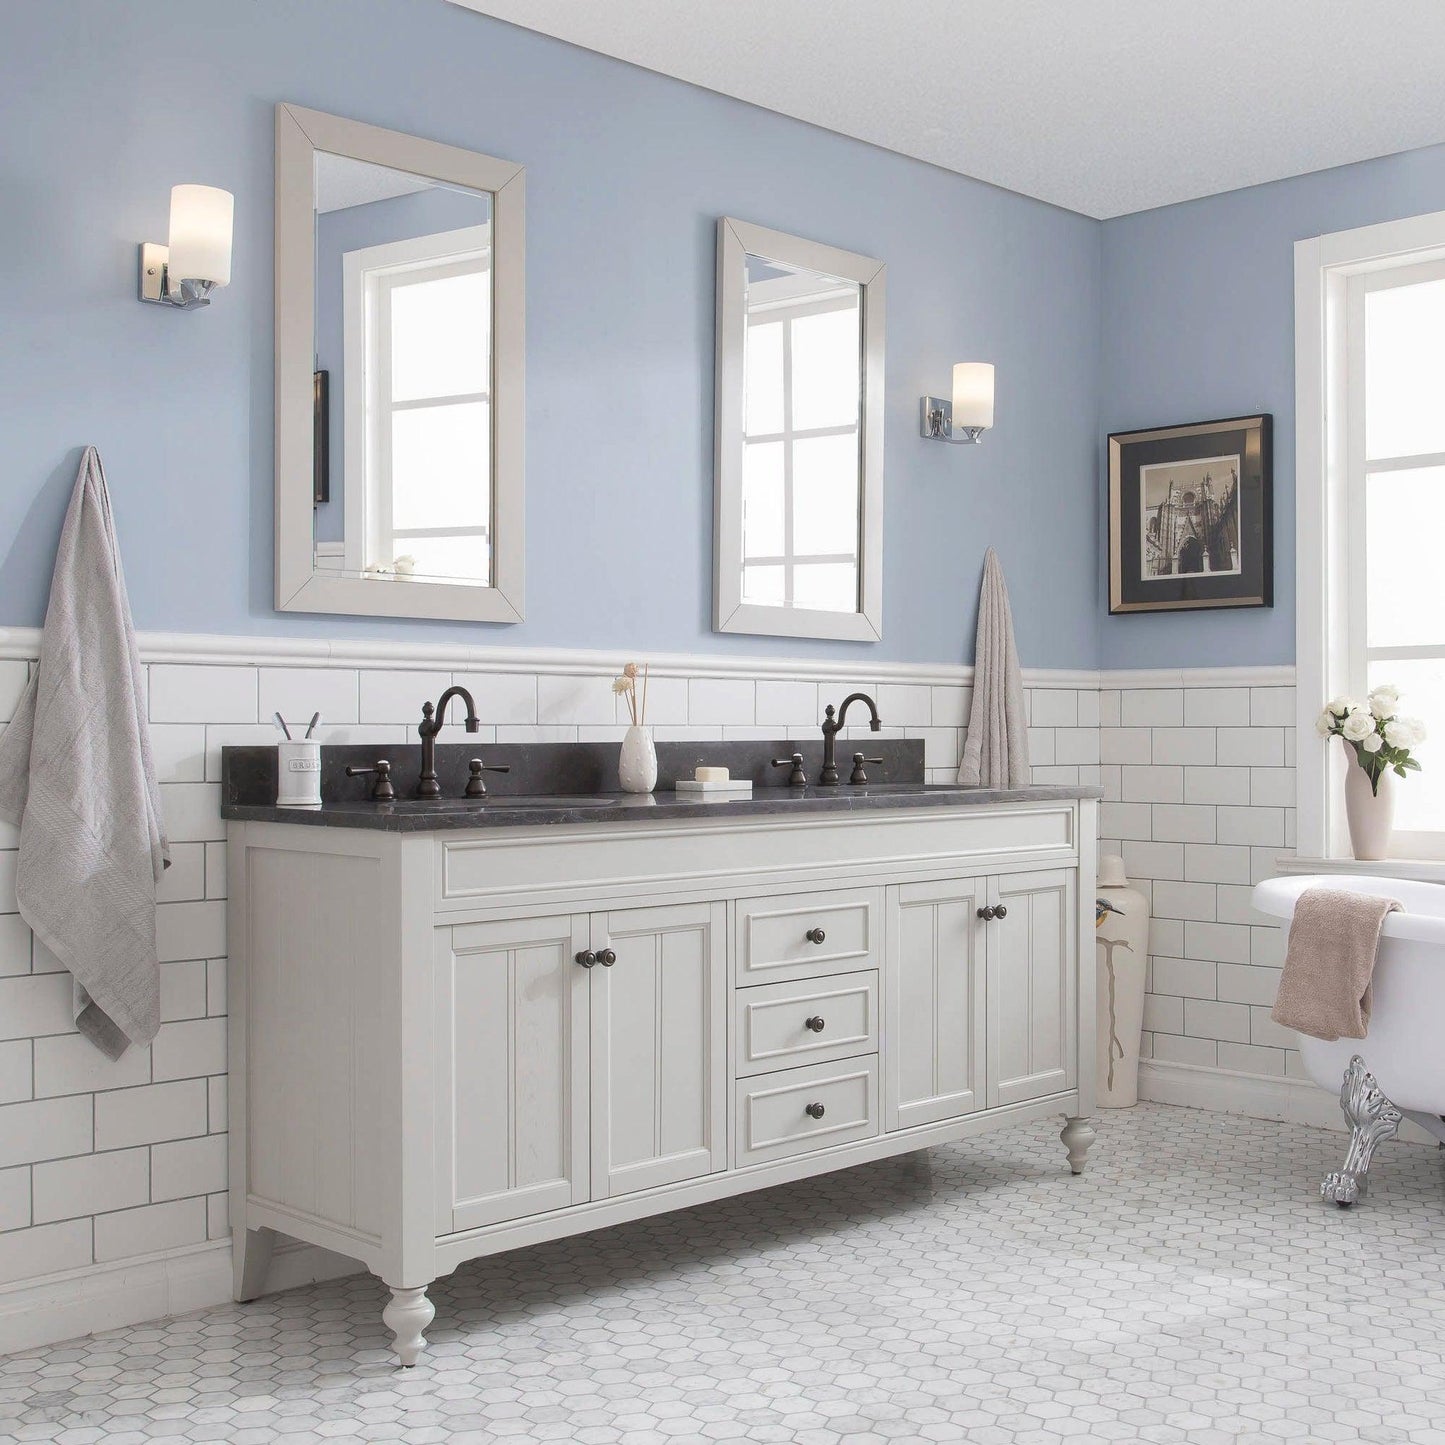 Water Creation Potenza 72" Bathroom Vanity in Earl Grey with Blue Limestone Top with Faucet